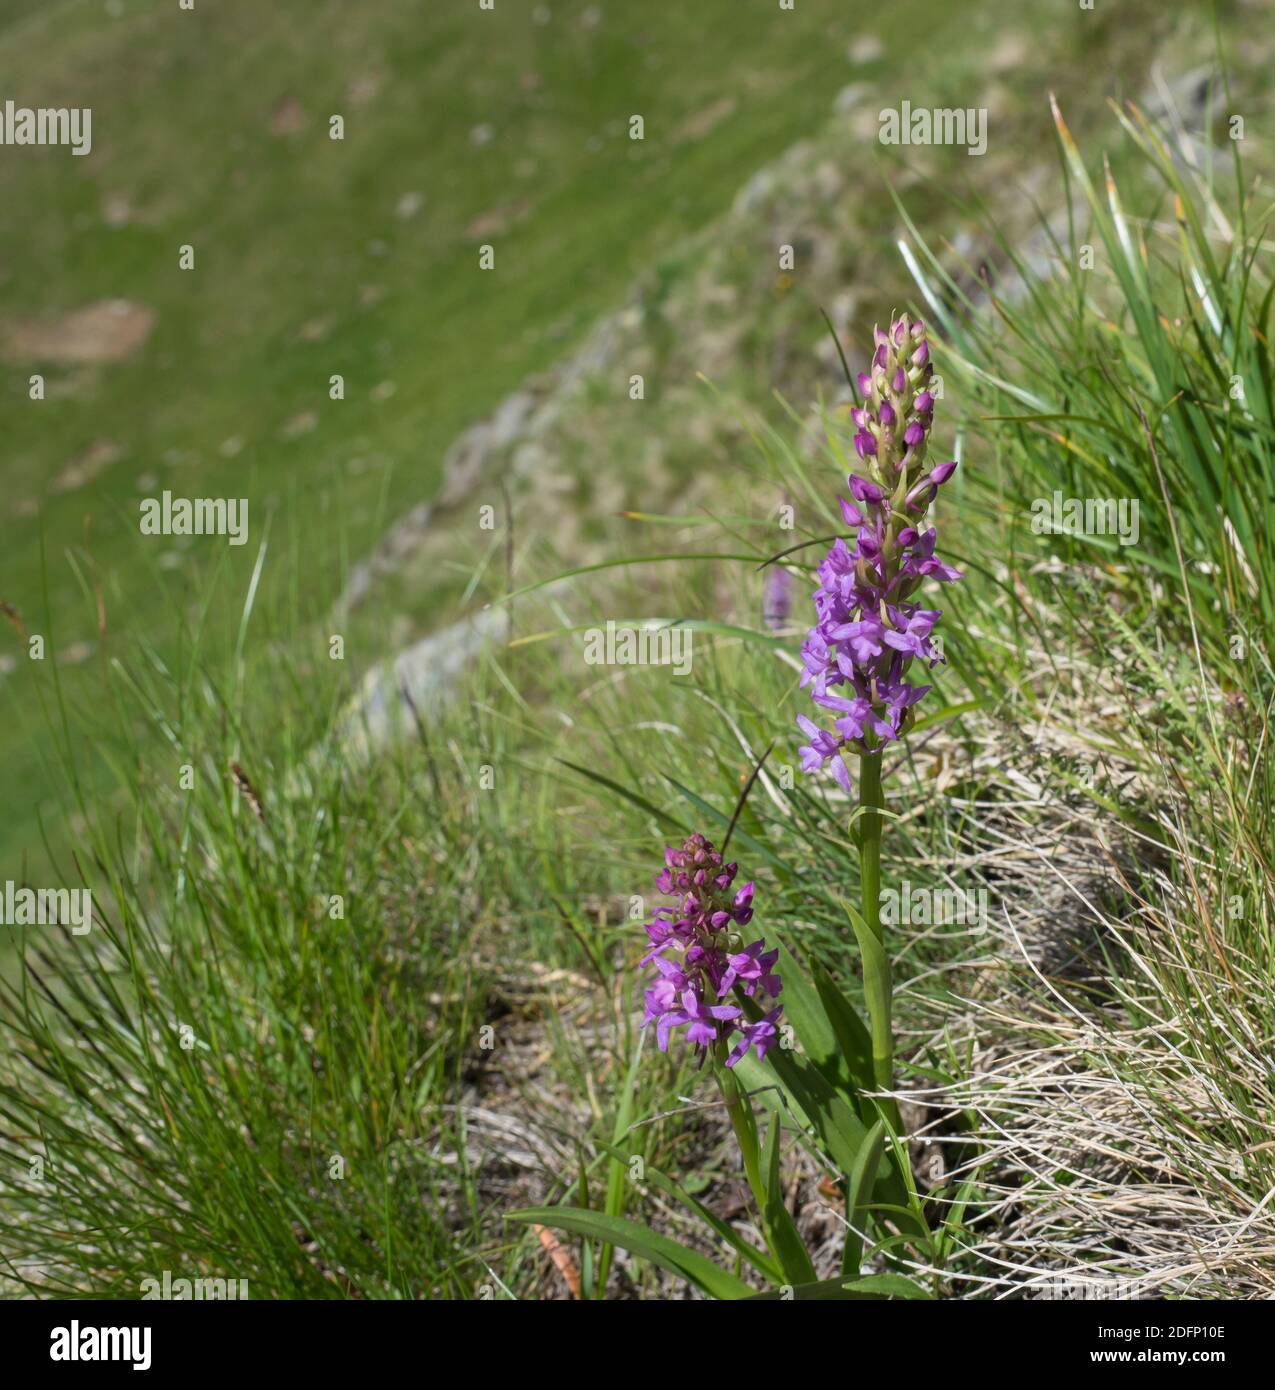 The fragrant orchid or marsh fragrant orchid, Gymnadenia conopsea pink flower in bloom on the alpine meadow, austria tyrol Stock Photo